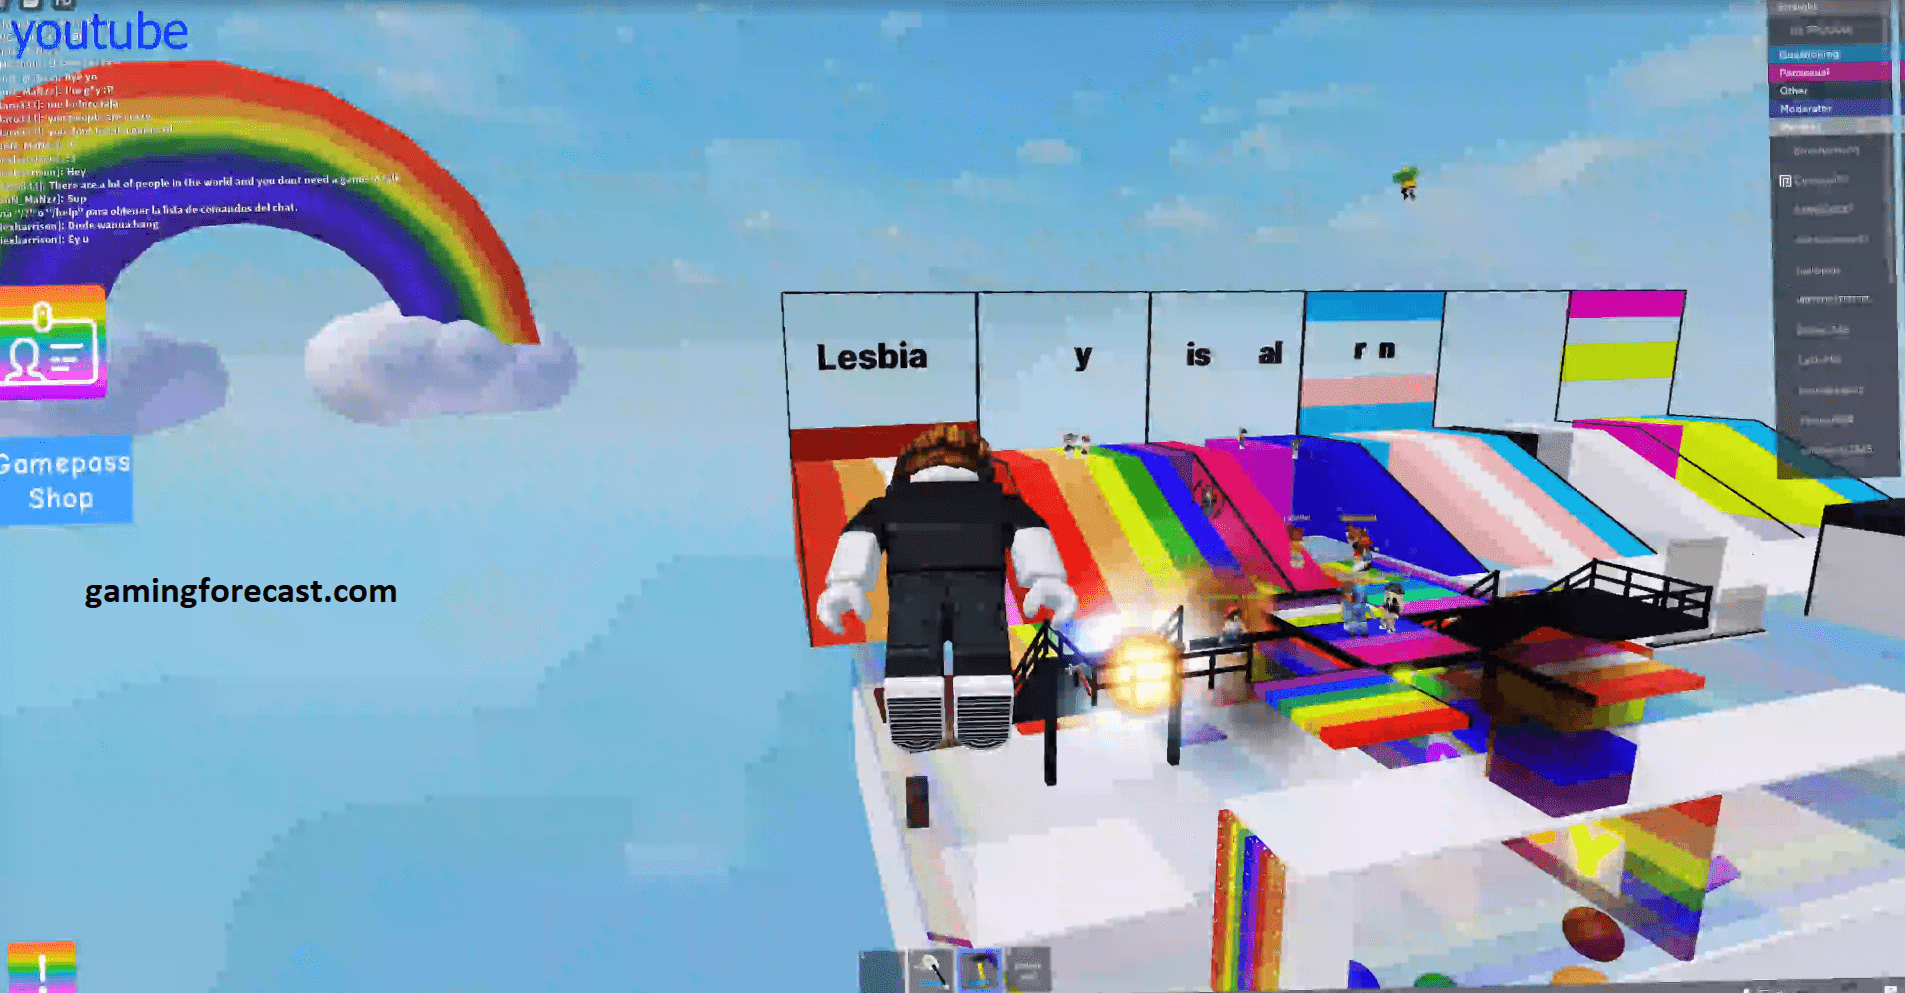 Roblox Hack Download Pc Destroy Lobby Fly Aimbot Scripts 2021 Gaming Forecast Download Free Online Game Hacks - free roblox hacking website